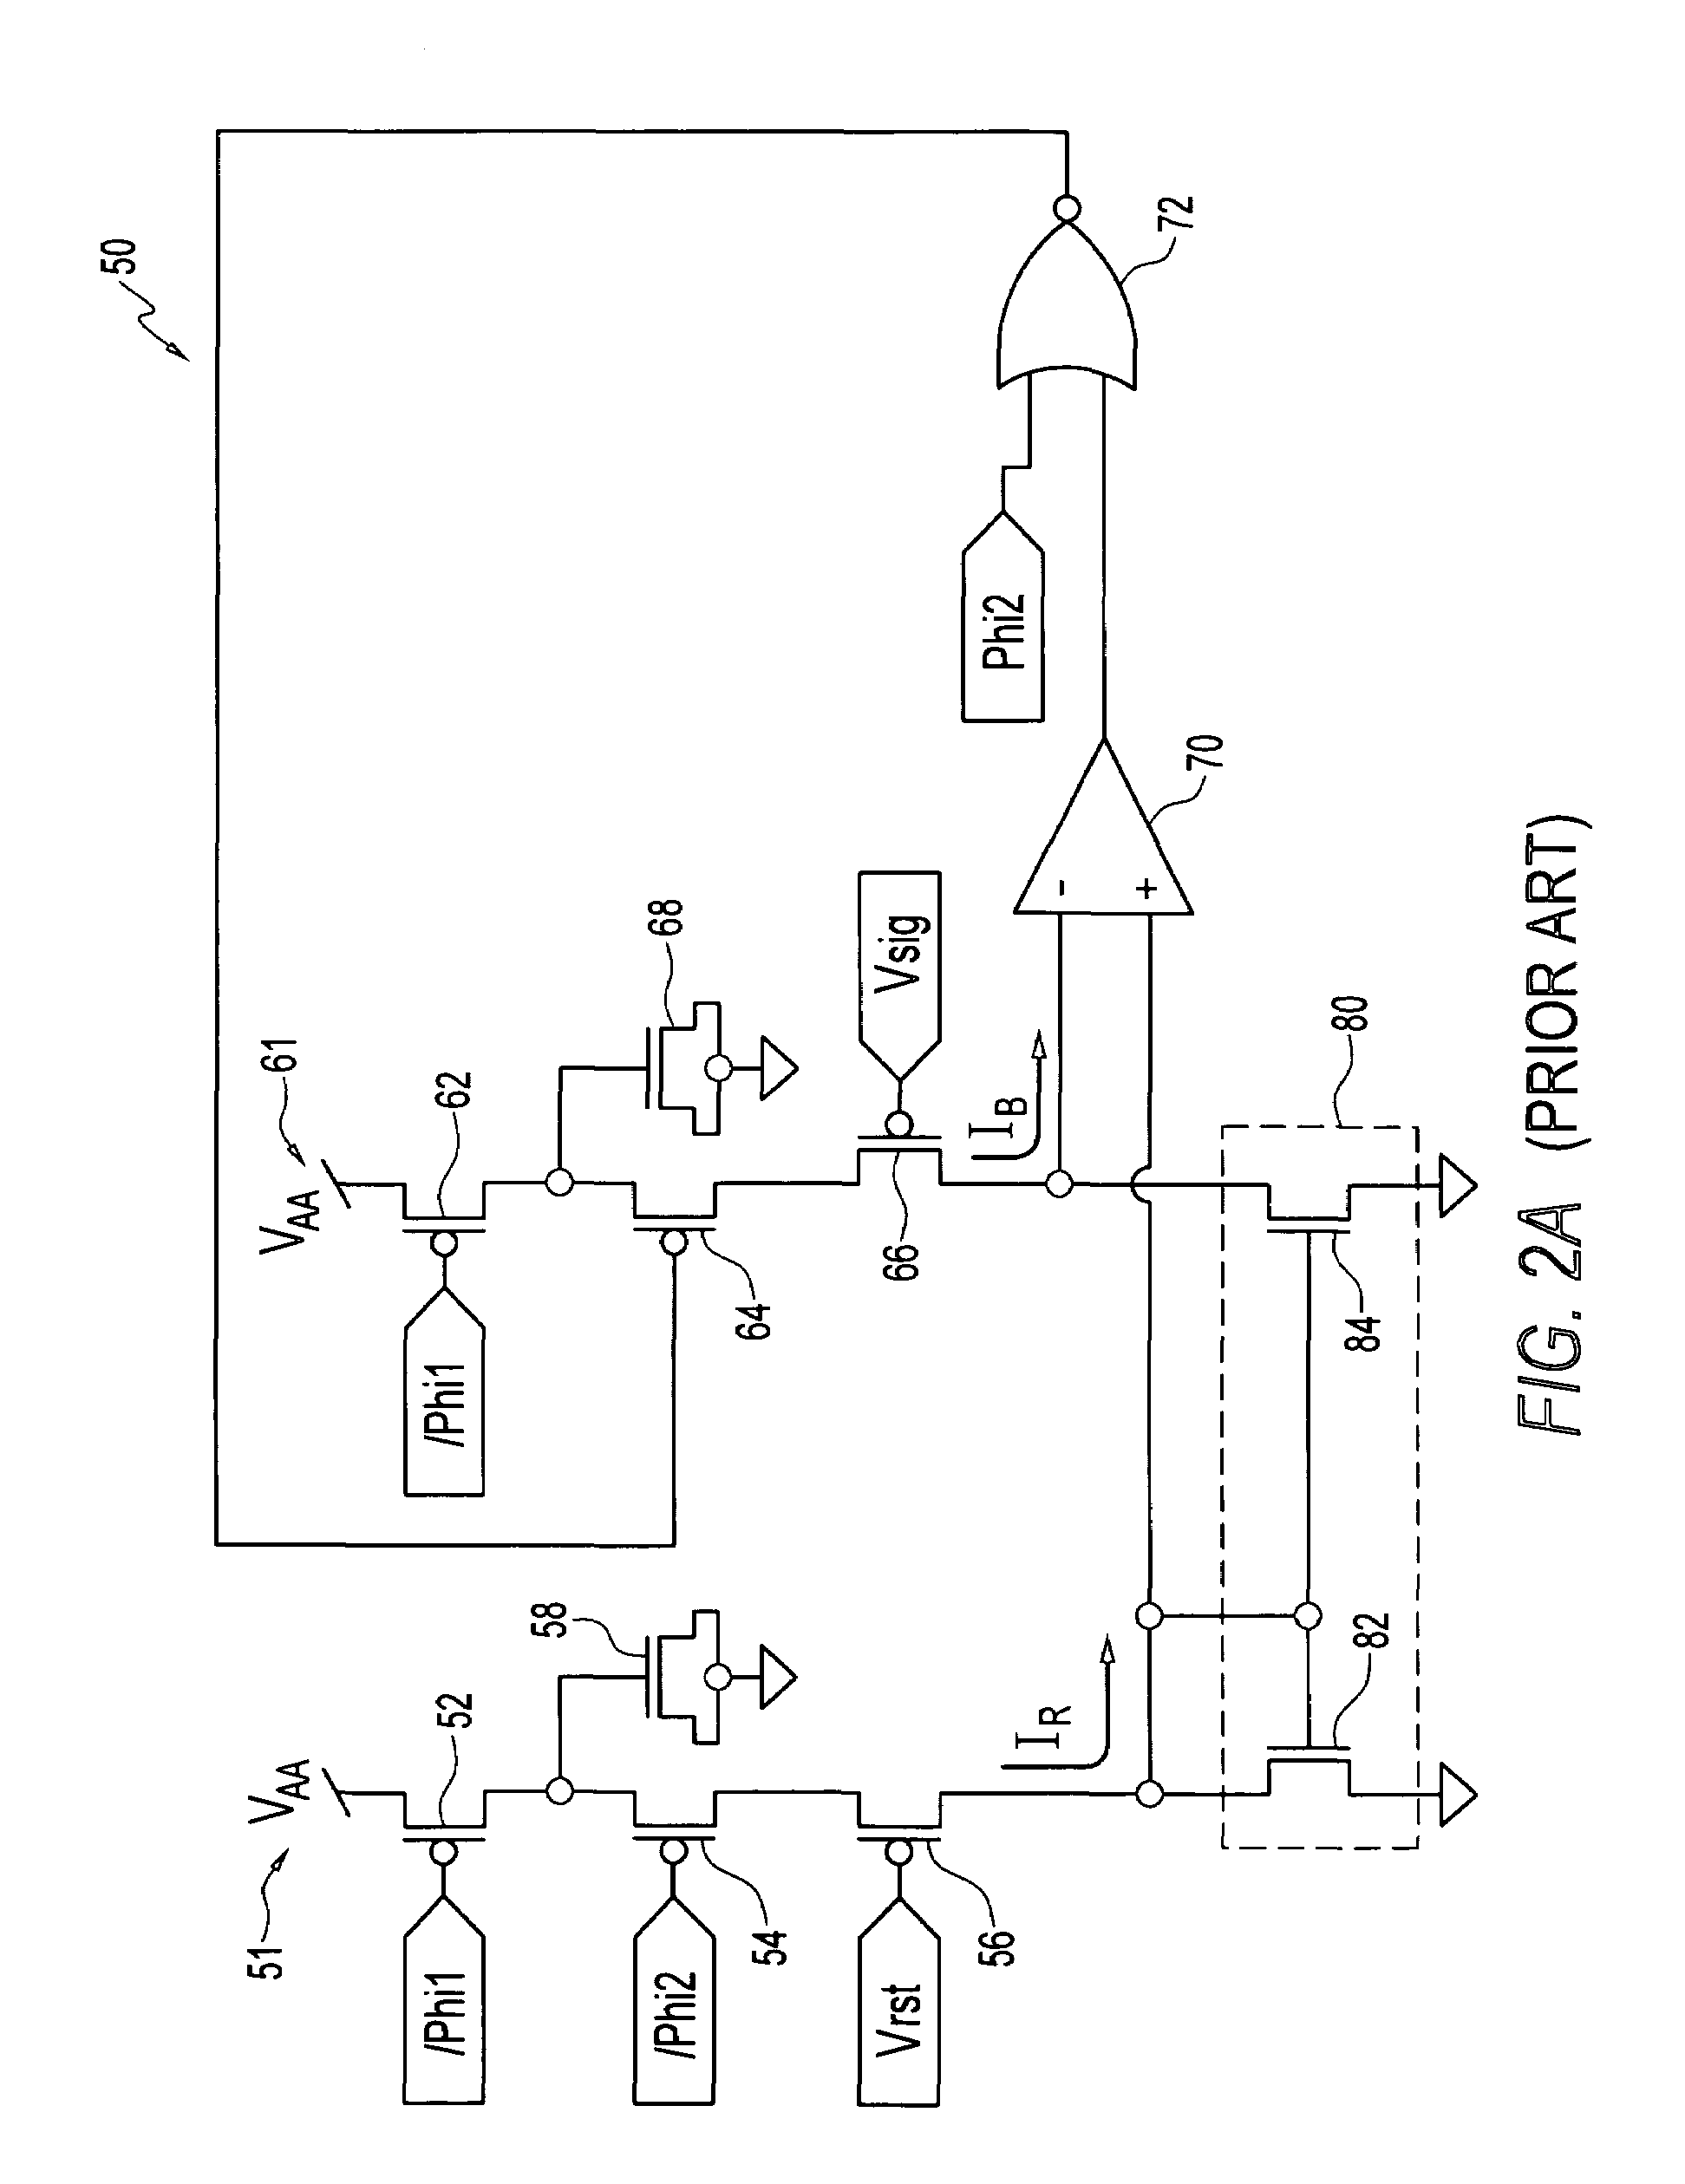 Column-parallel sigma-delta analog-to-digital conversion with gain and offset control